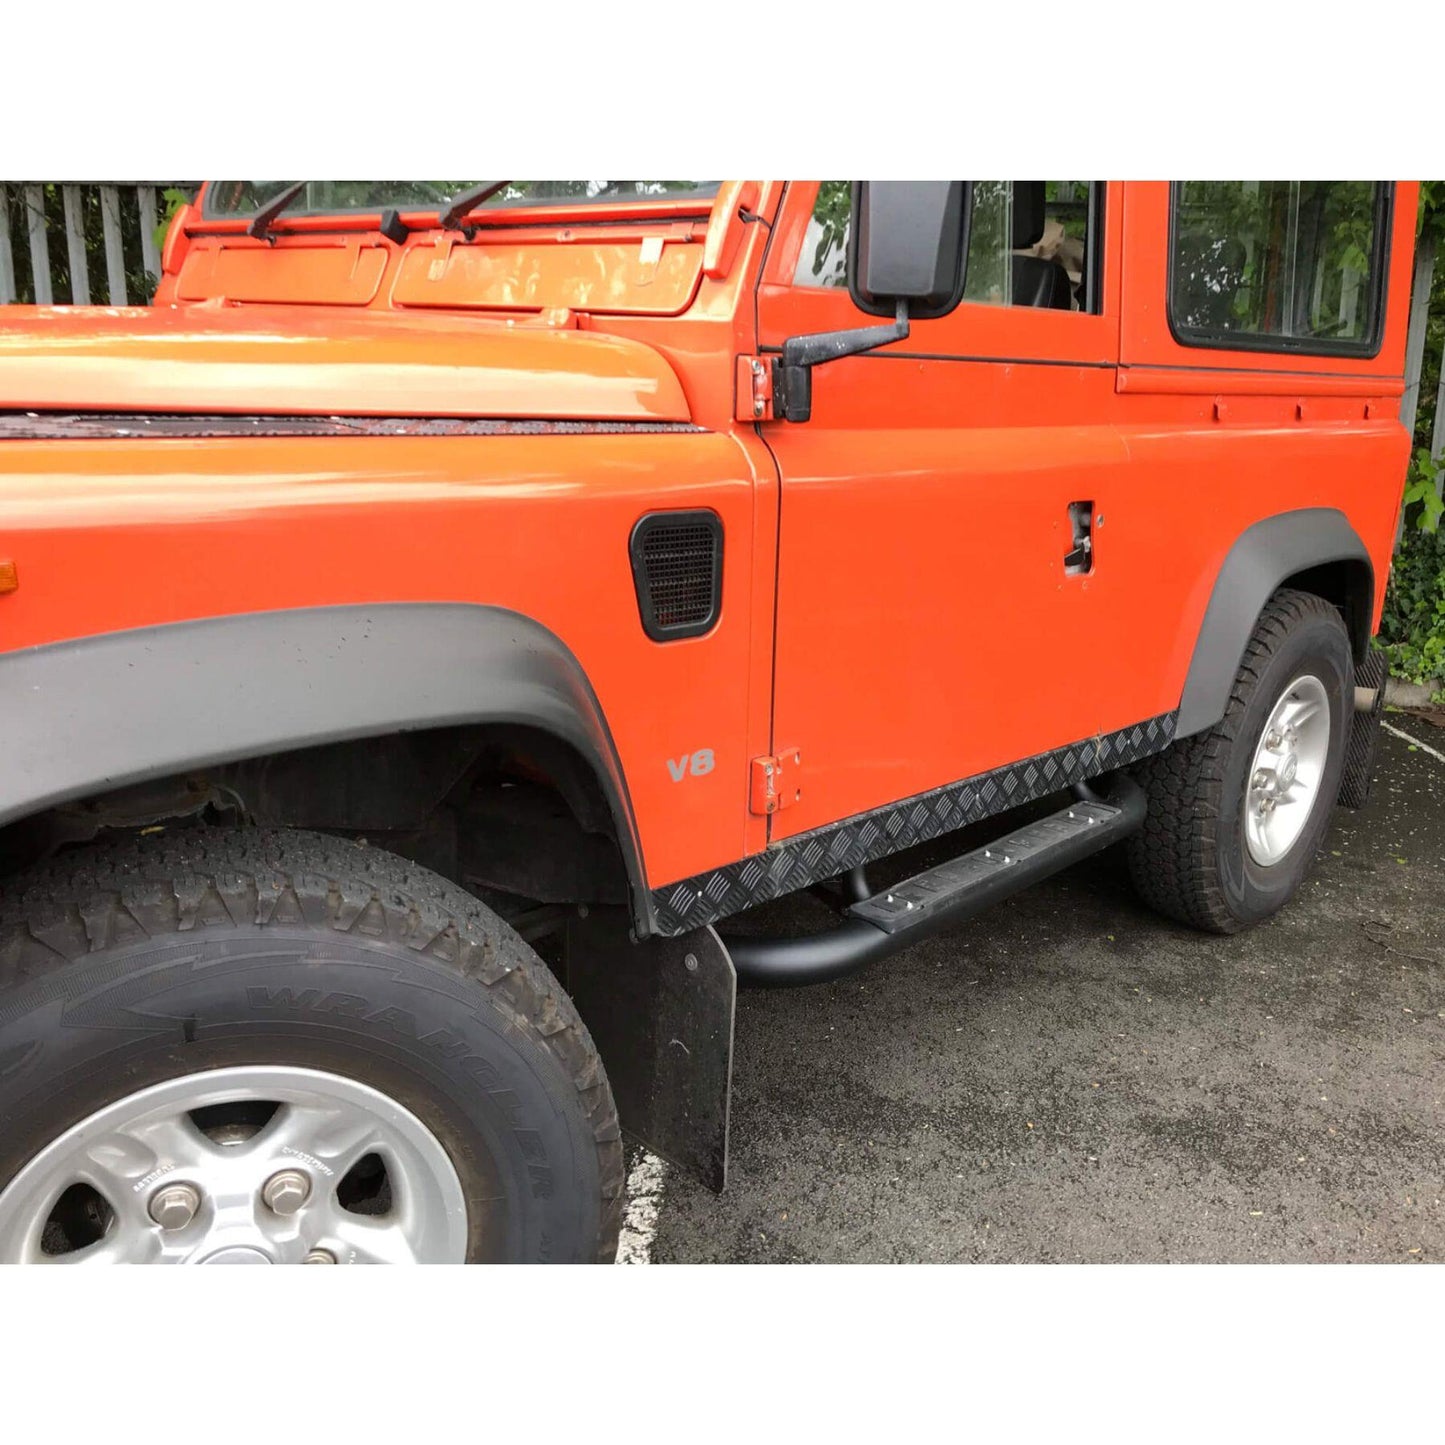 OE Fire and Ice Style Tubular Side Steps for Land Rover Defender 90 2003-2016